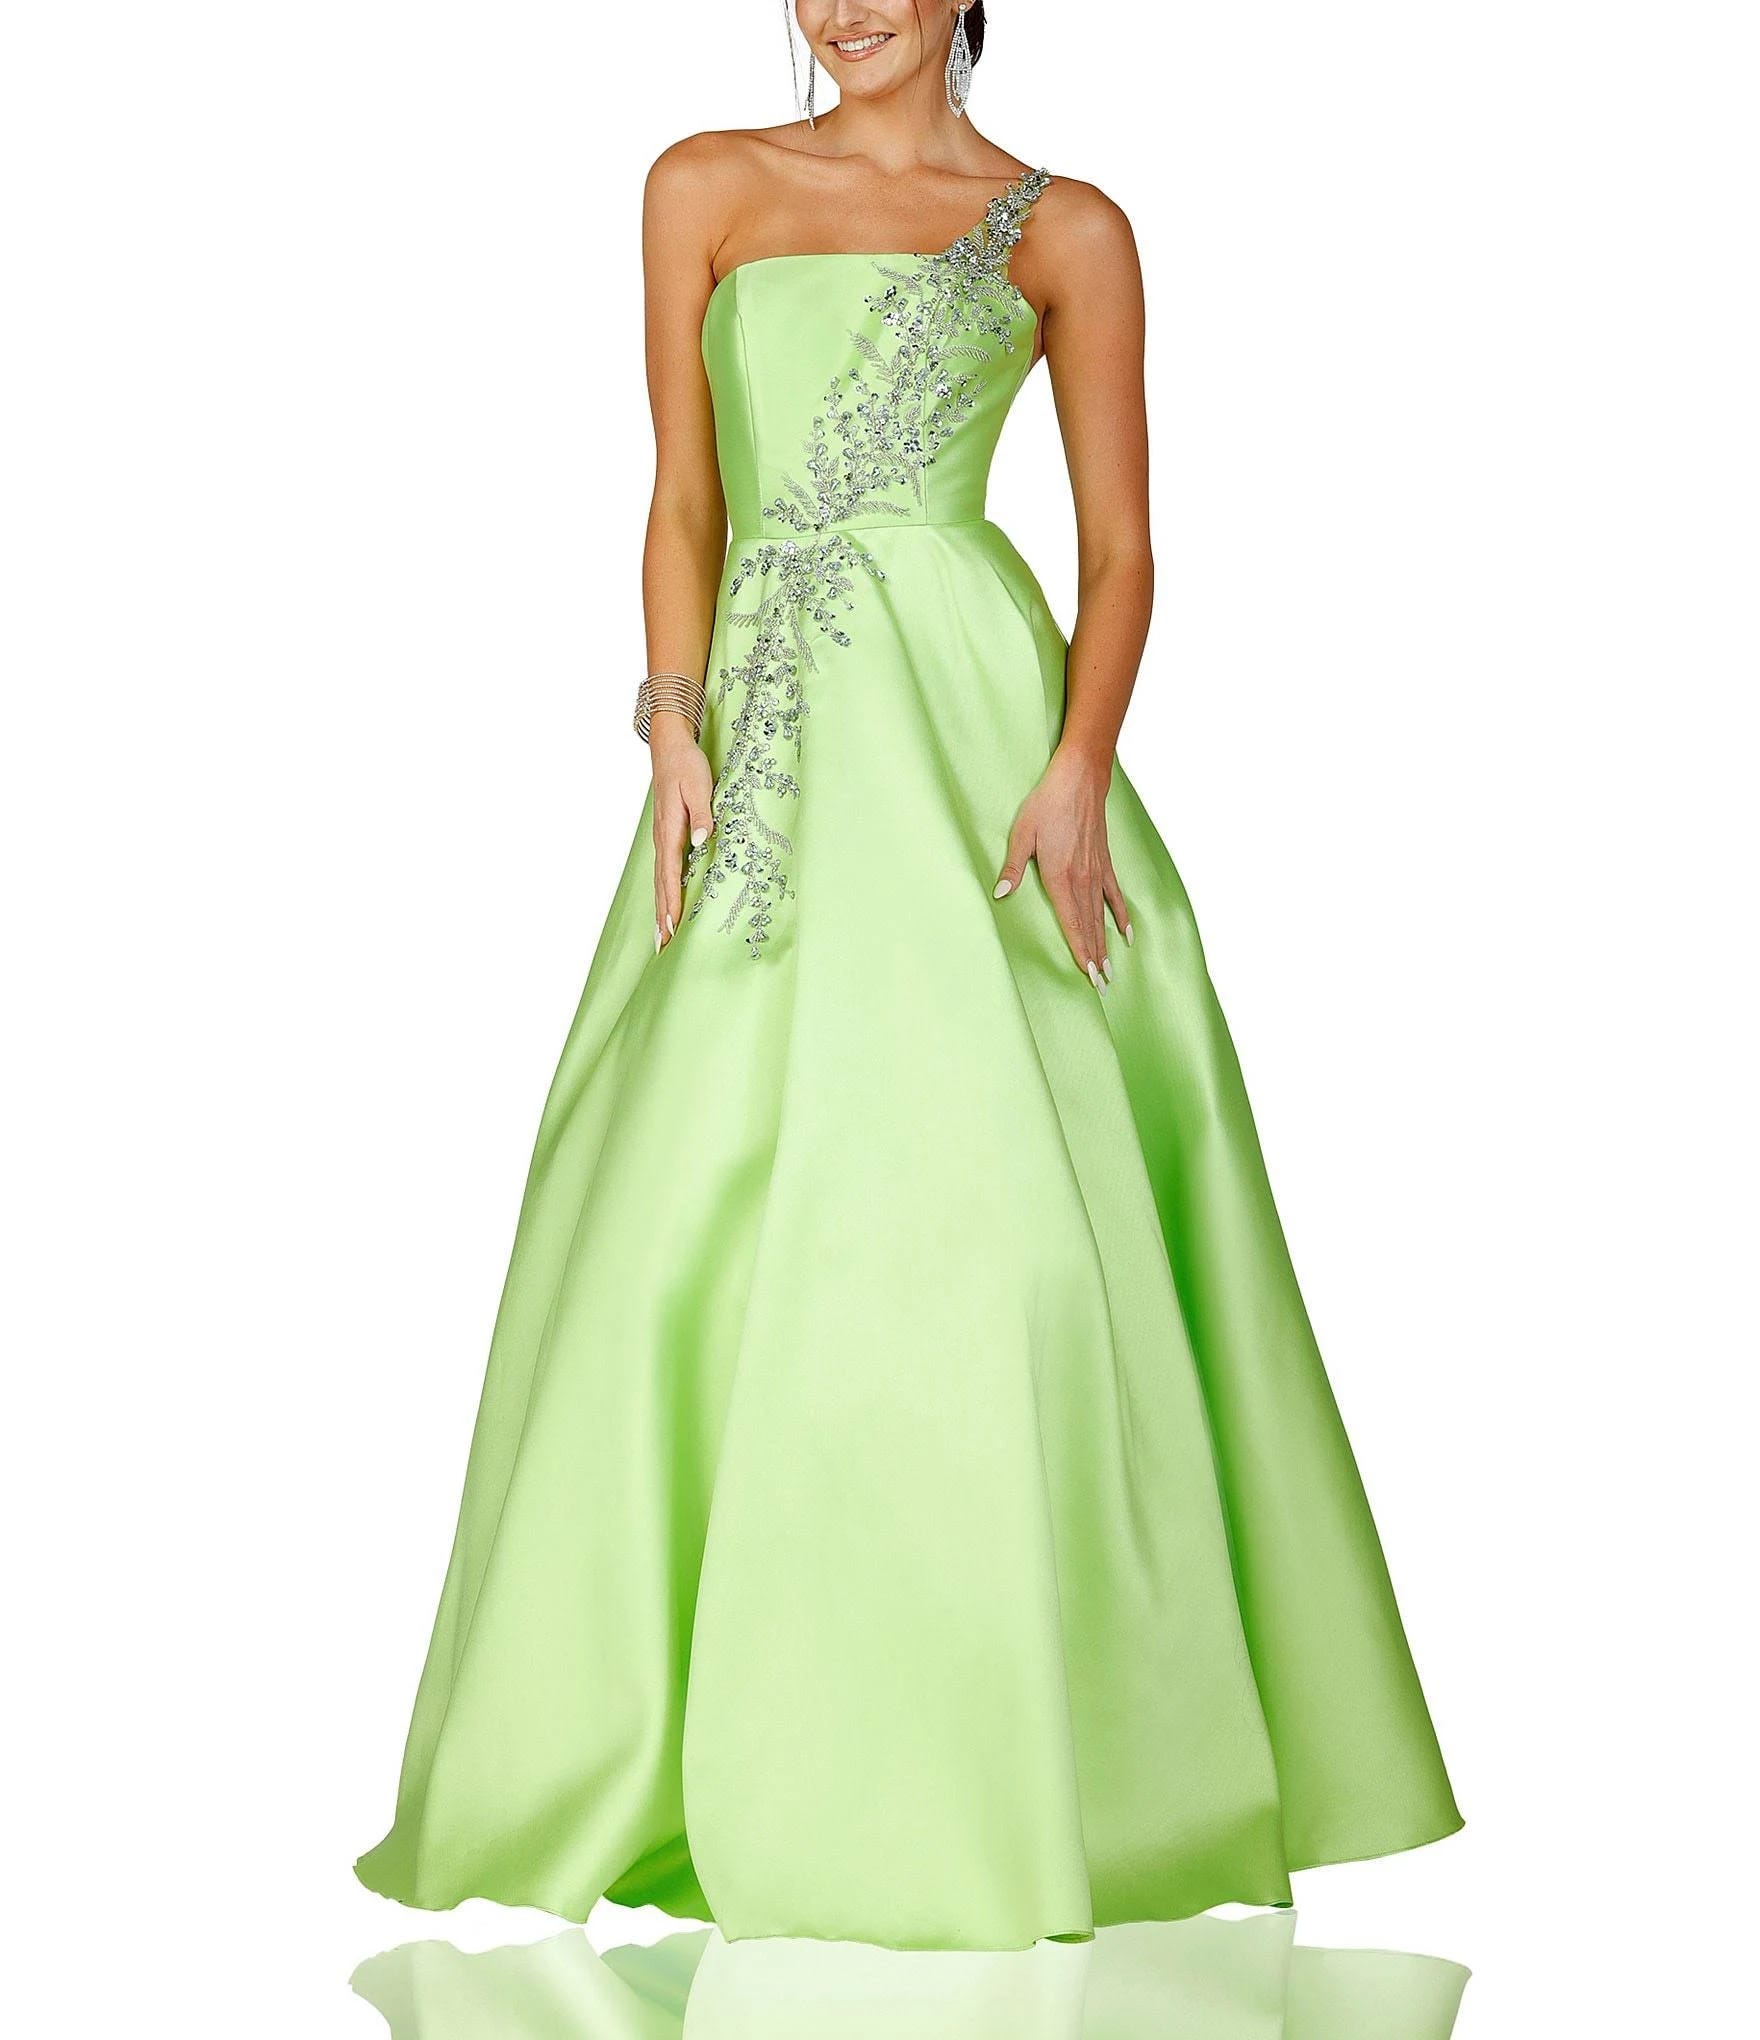 Lime Green One-Shoulder Ballgown by Terani Couture | Image